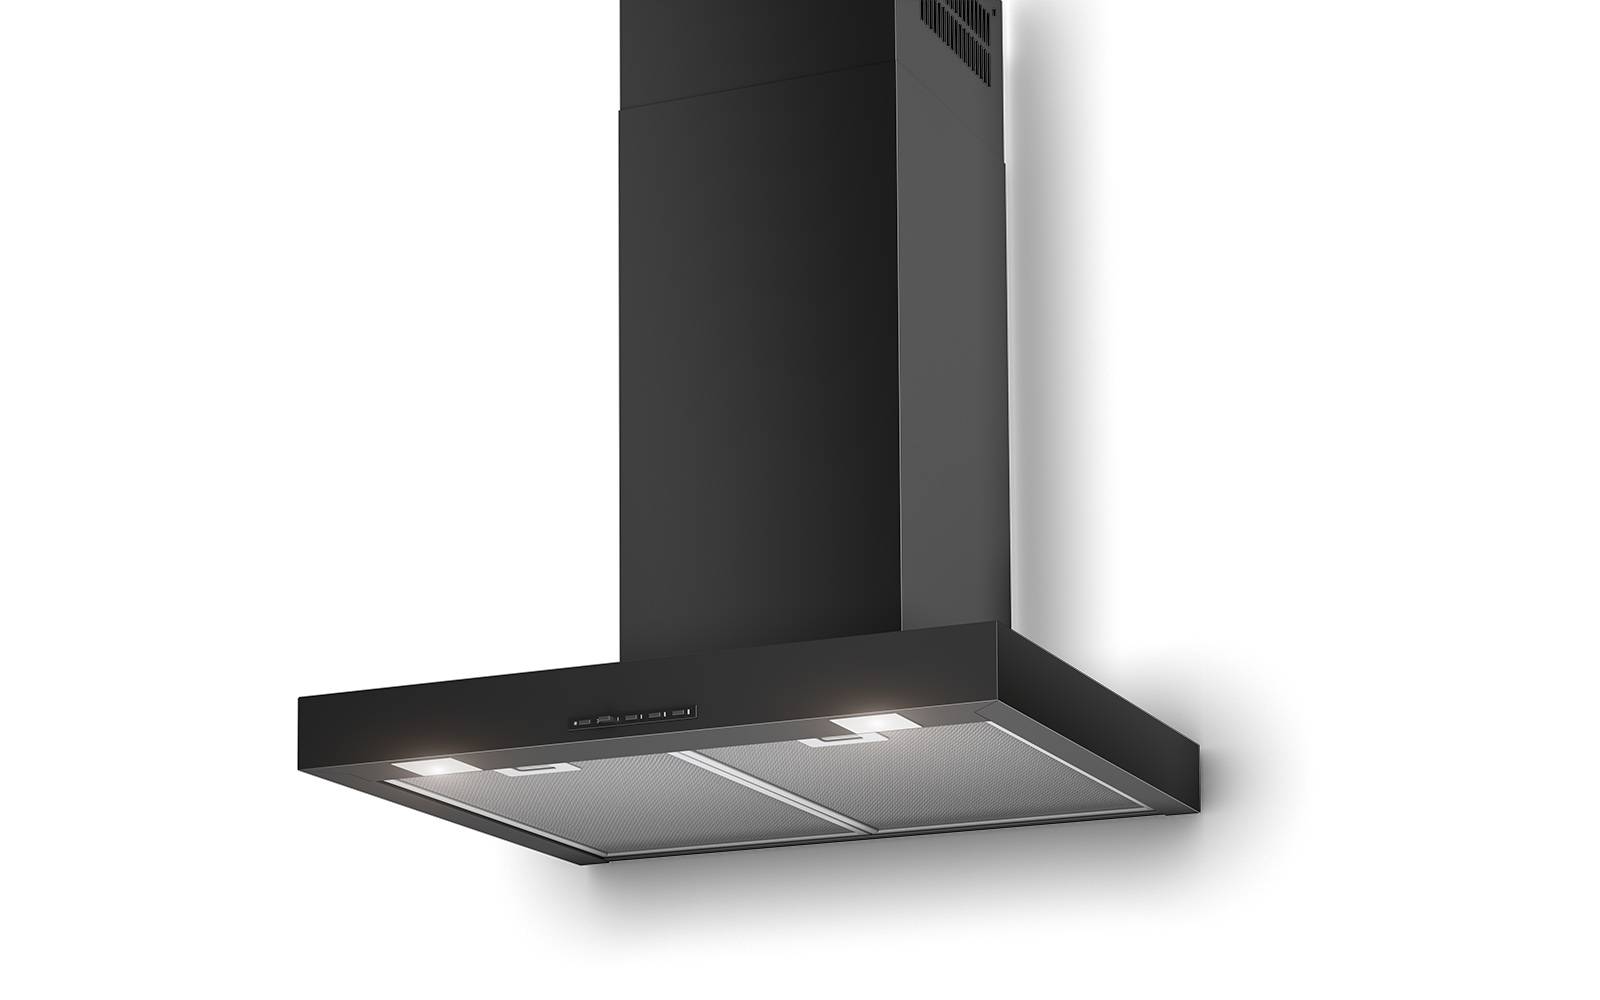 Airforce F53 S4 60cm Wall Mounted Cooker Hood with Soft Push Button Control- Black Finish